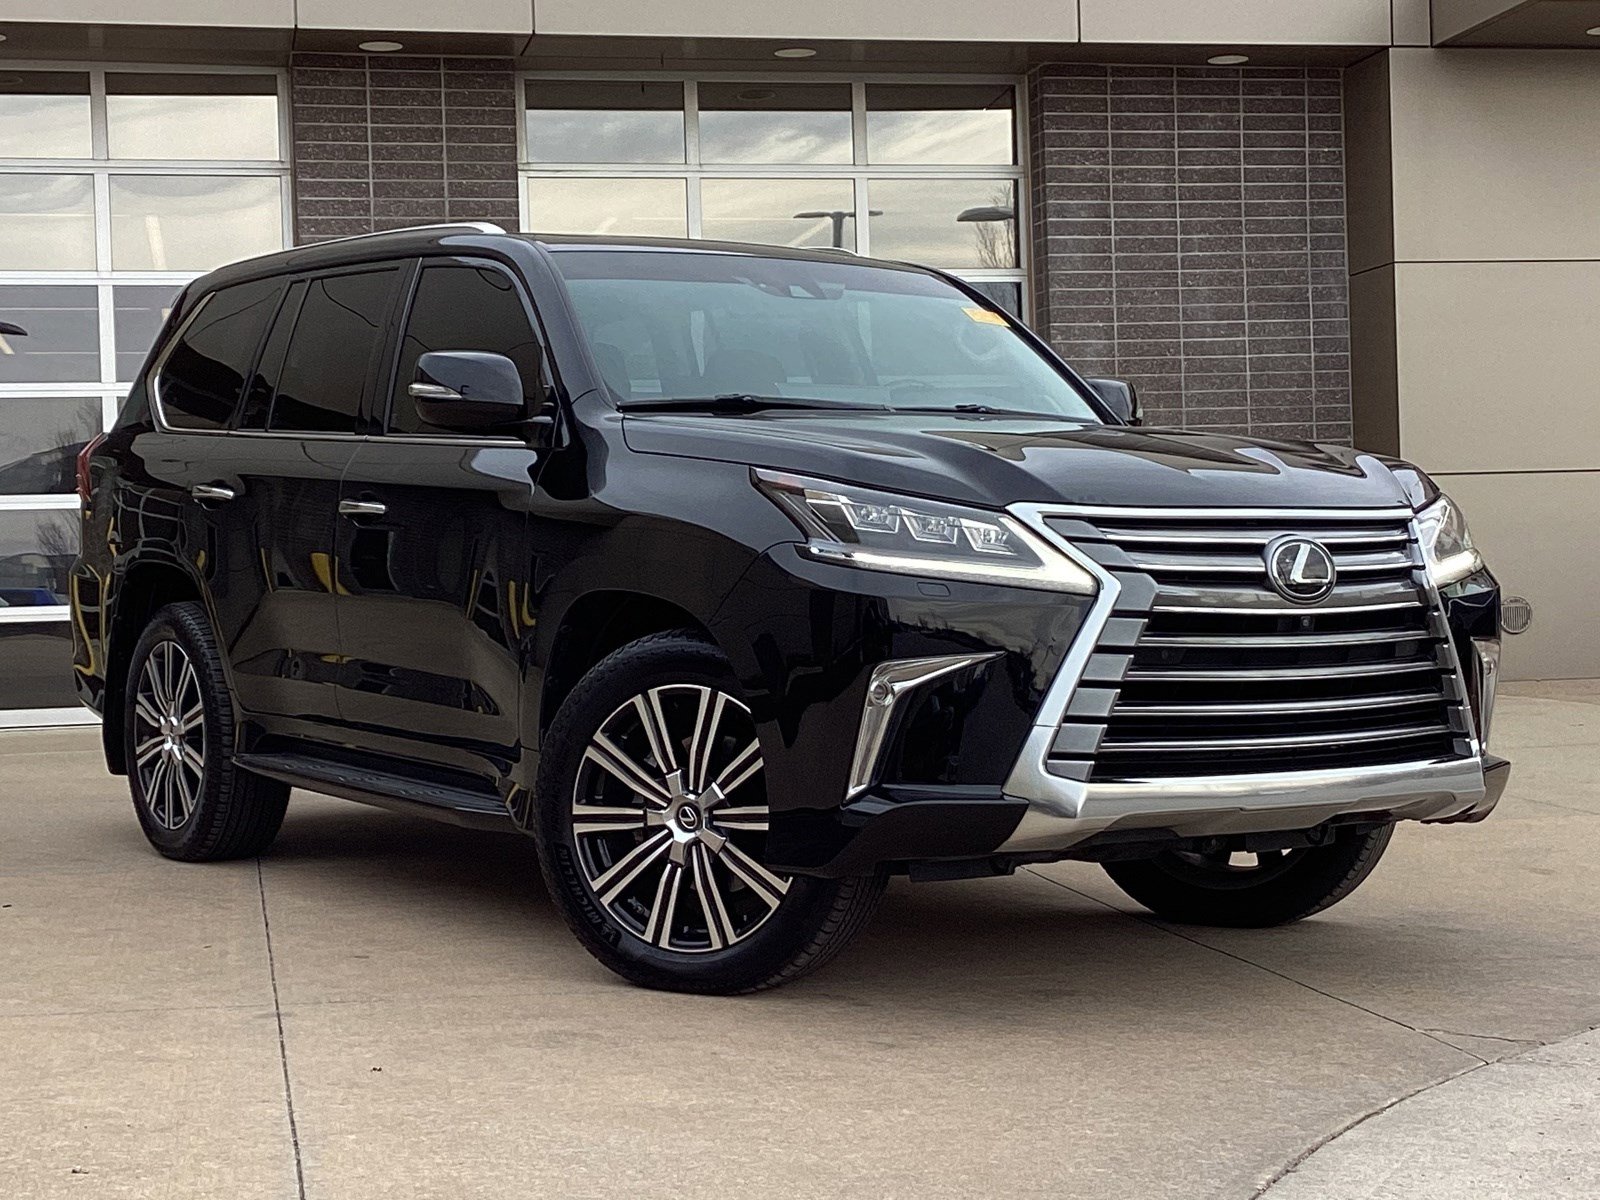 Certified Pre-Owned 2019 Lexus LX 570 SUV in Cary #P09991 | Hendrick Dodge  Cary